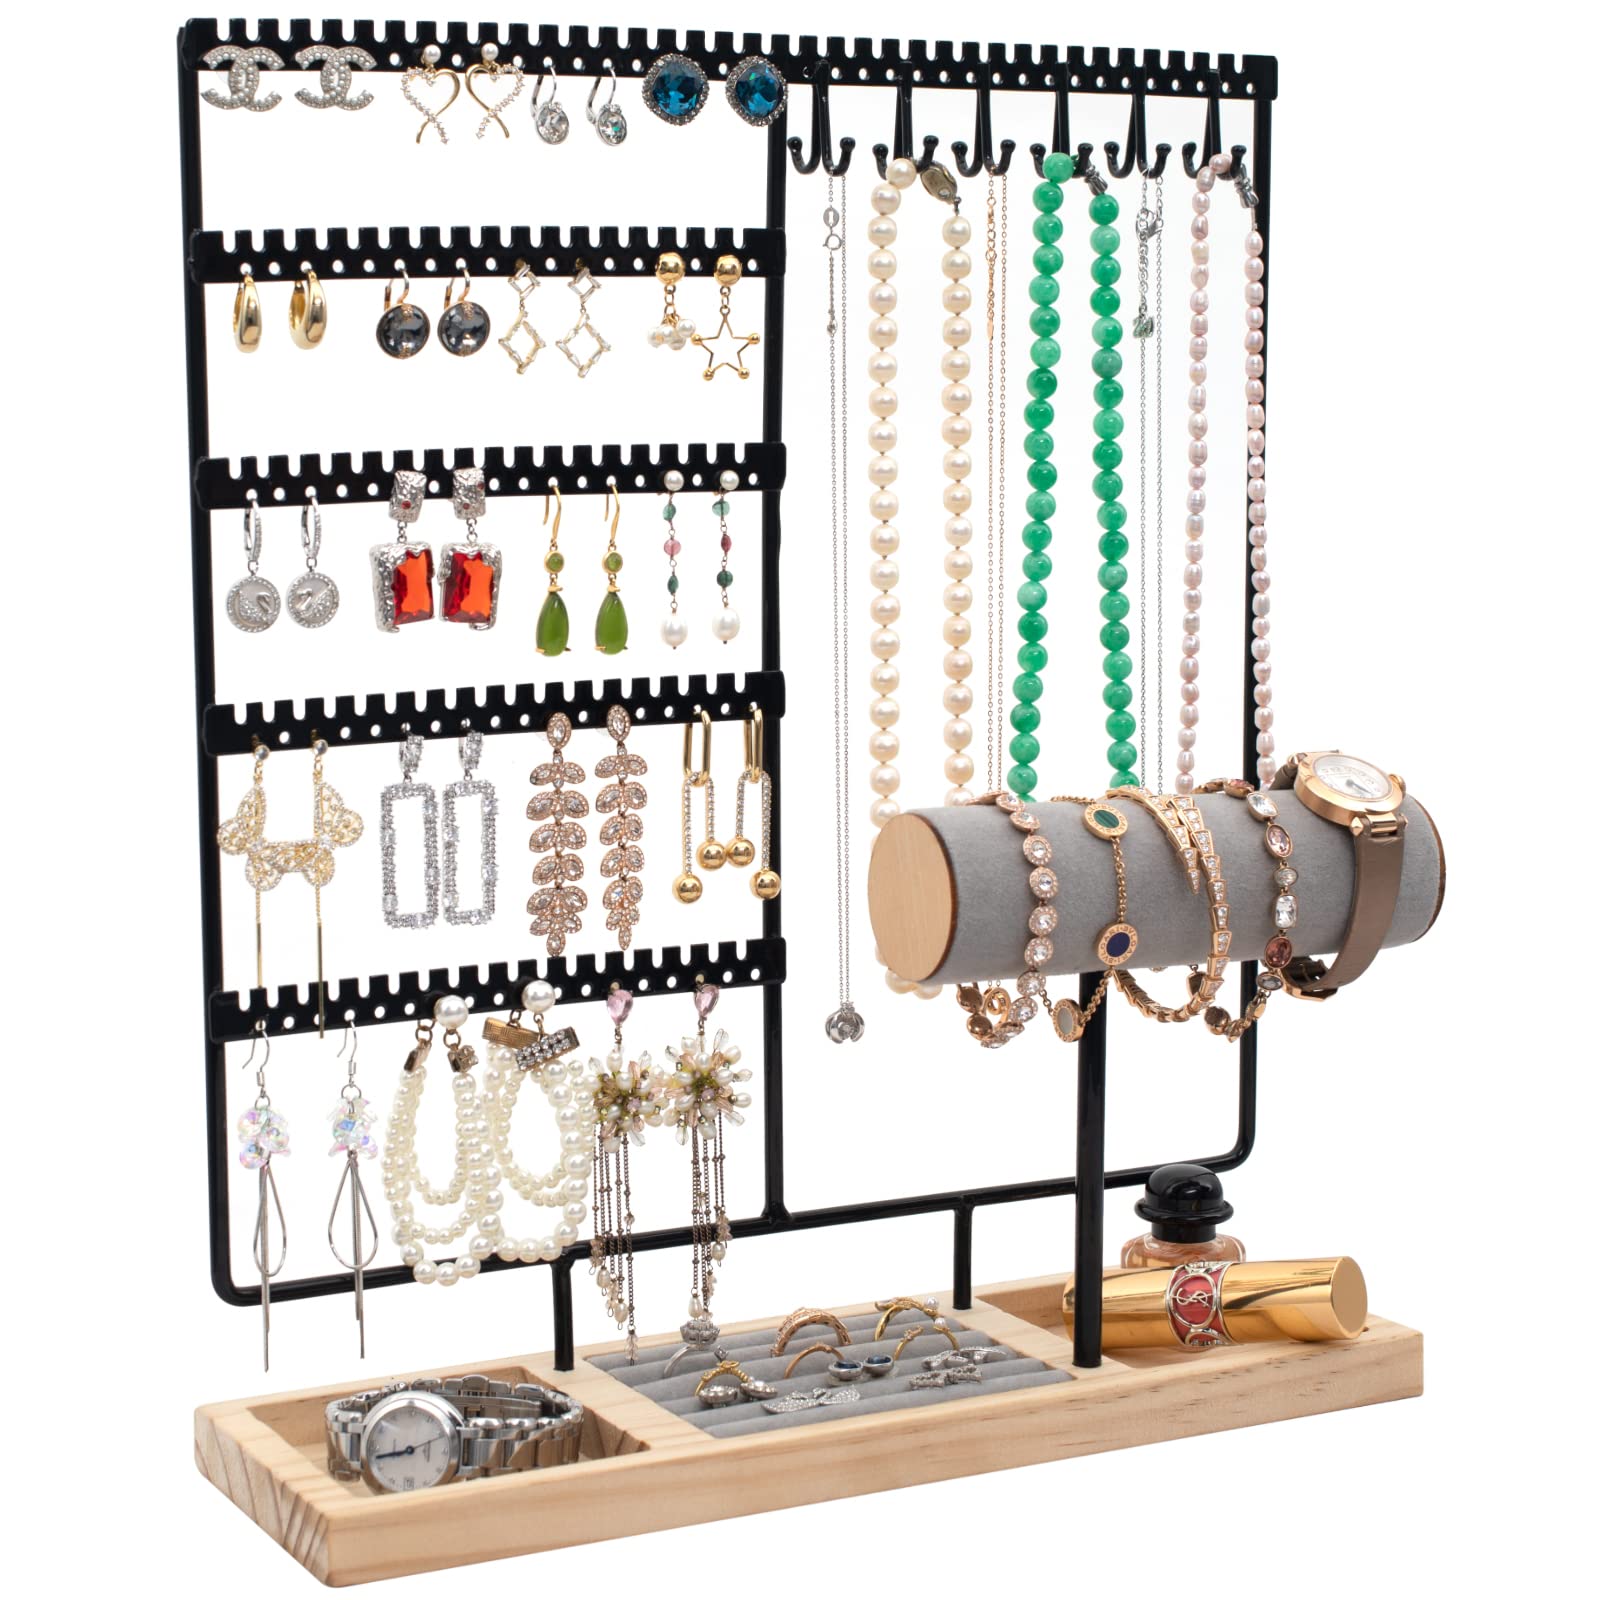 ABOUT SPACE Earring OrganizerMetal Earring Display Stand with 144 Holes   3 LayerEarring Holder  Jewellery Storage Display Stand for EarringStudDangle   Dressing TableL 95 x B 3 x H 105 